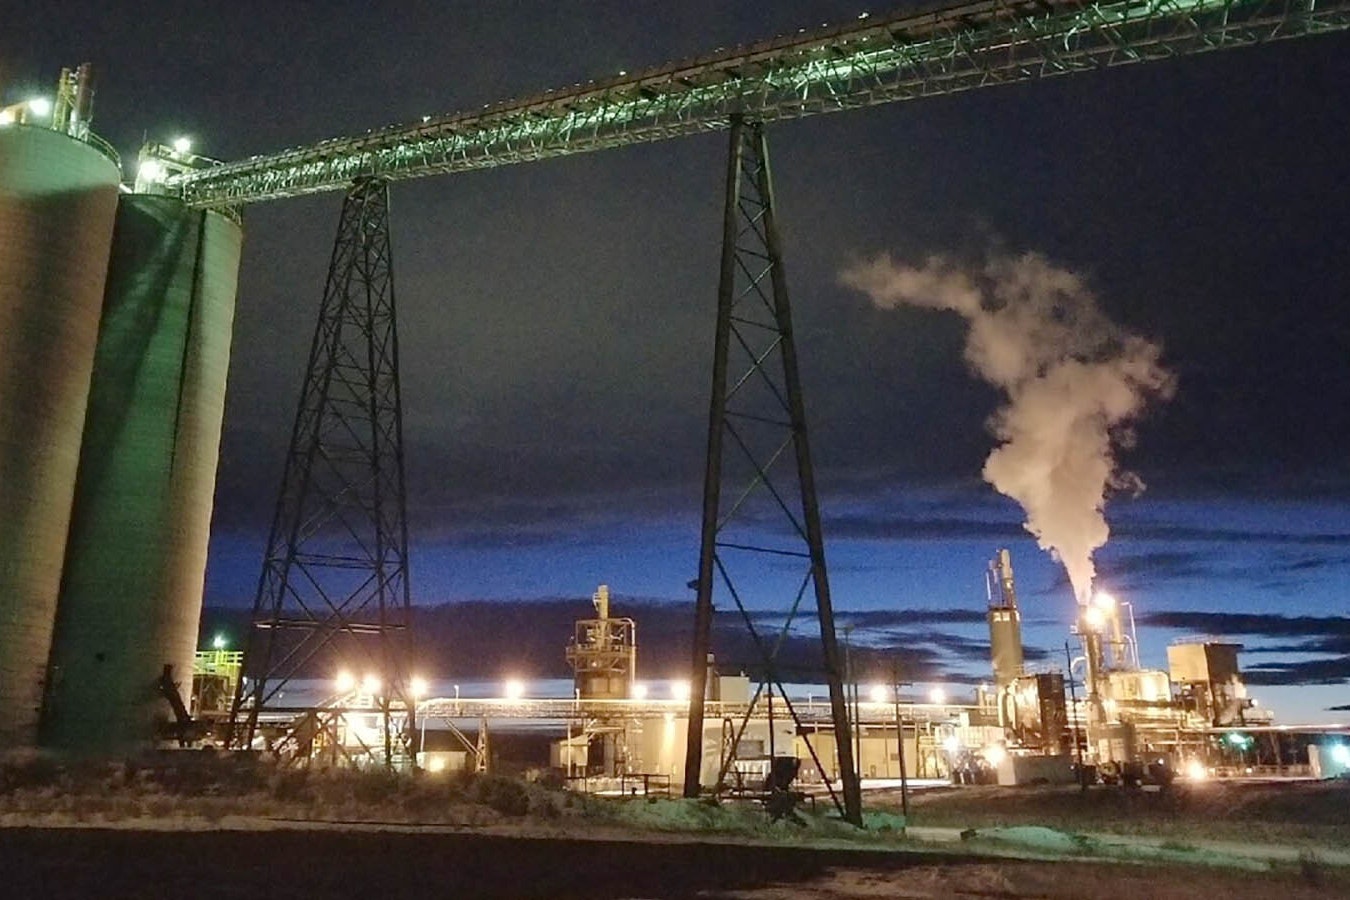 Atlas Carbon in Gillette operates at the former Fort Union mine site in Campbell County, turning Power River Basin coal into activated carbon for filters using a proprietary process.